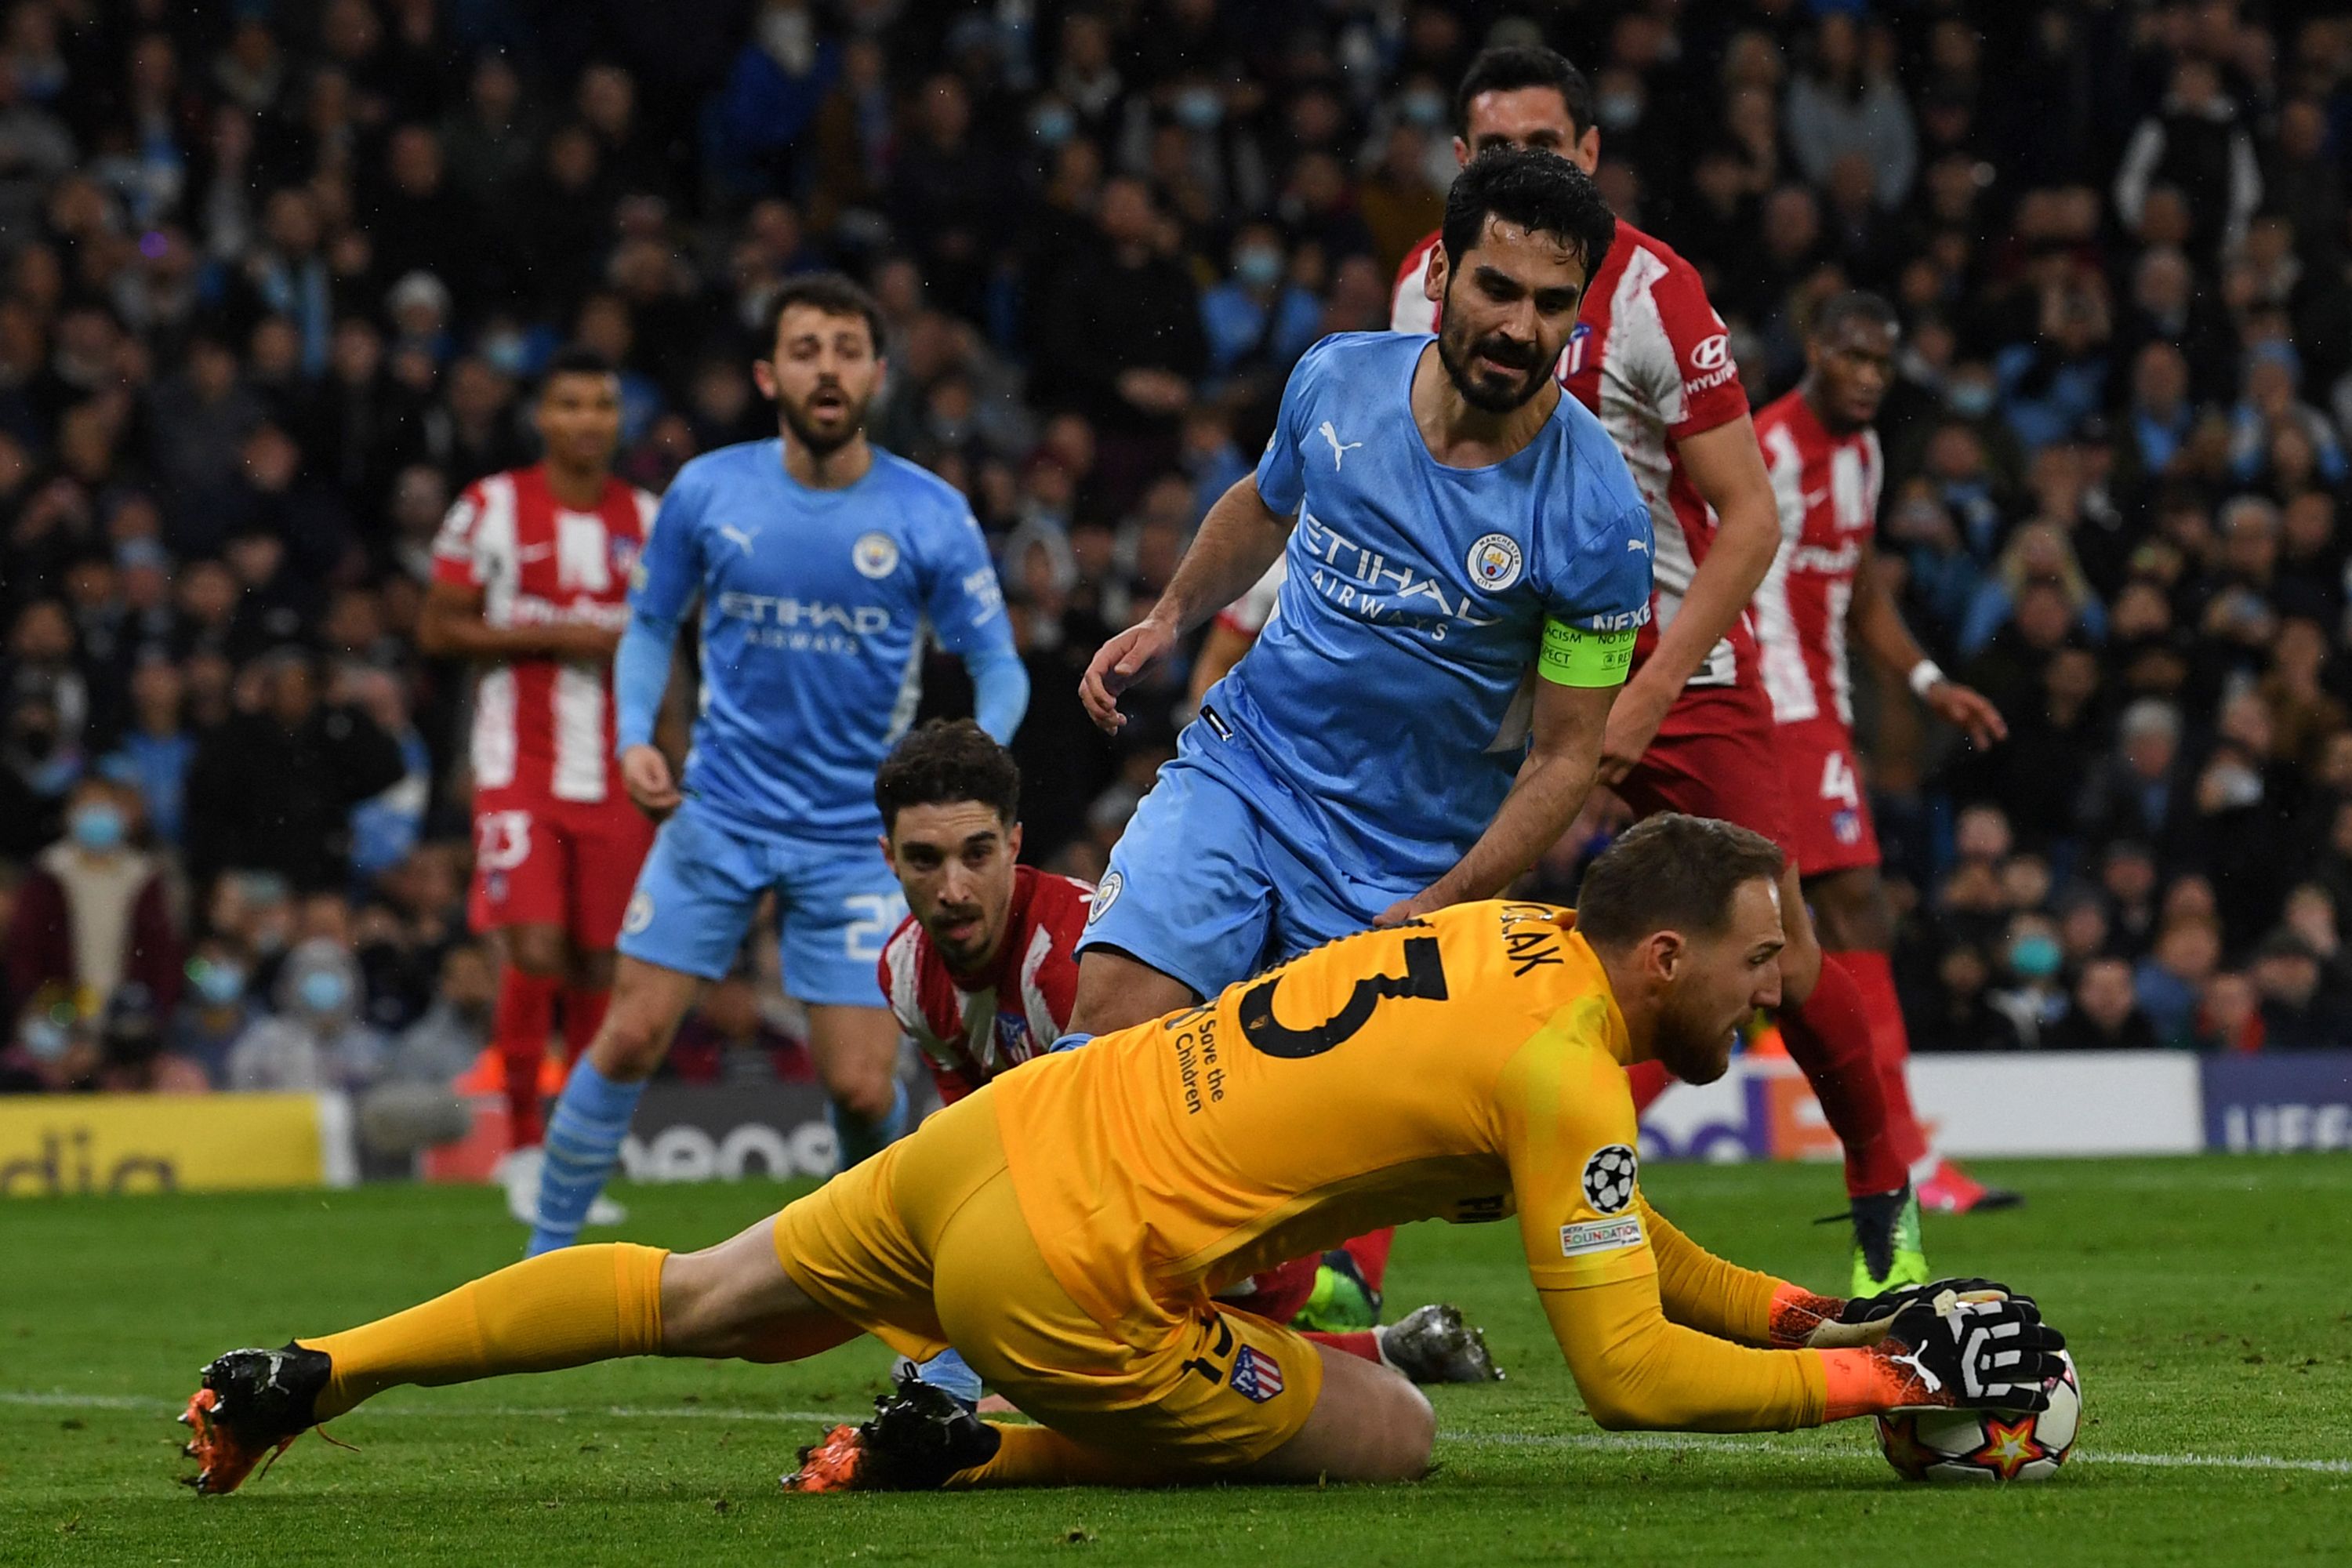 UEFA Champions League Quarterfinal: Atletico Madrid vs Manchester City: Can Diego Simeone and his men break Man City's Champions League dreams? Team News, Live Streaming & more